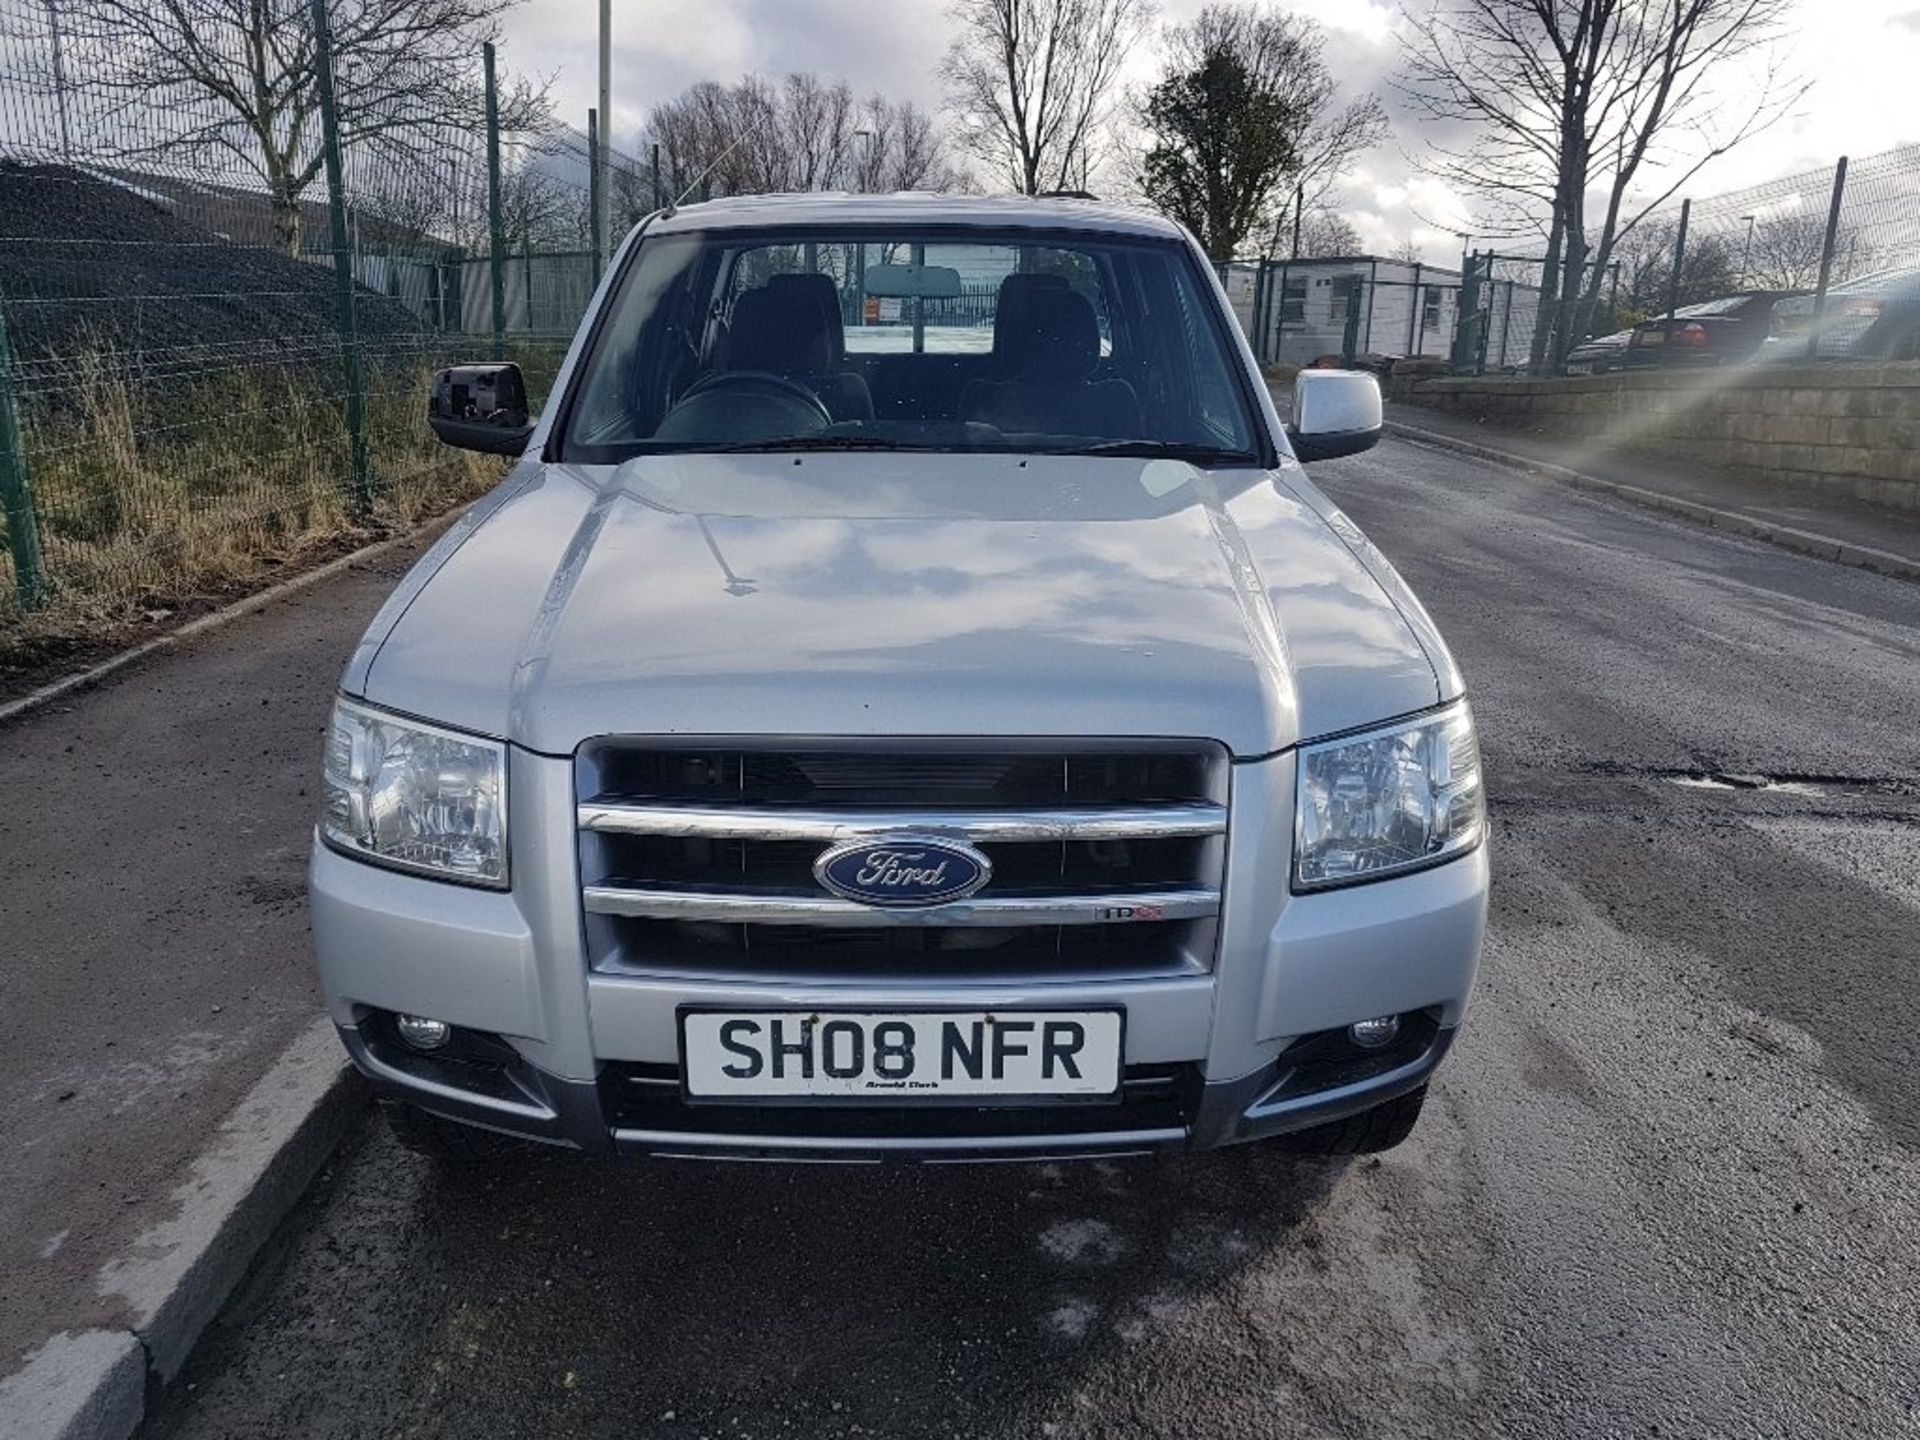 FORD 4X4, RANGER 2.5 TDCI XLT DOUBLE CAB, SH08 NFR, FIRST DATE OF REGISTRATION 30/05/2008, 2.5